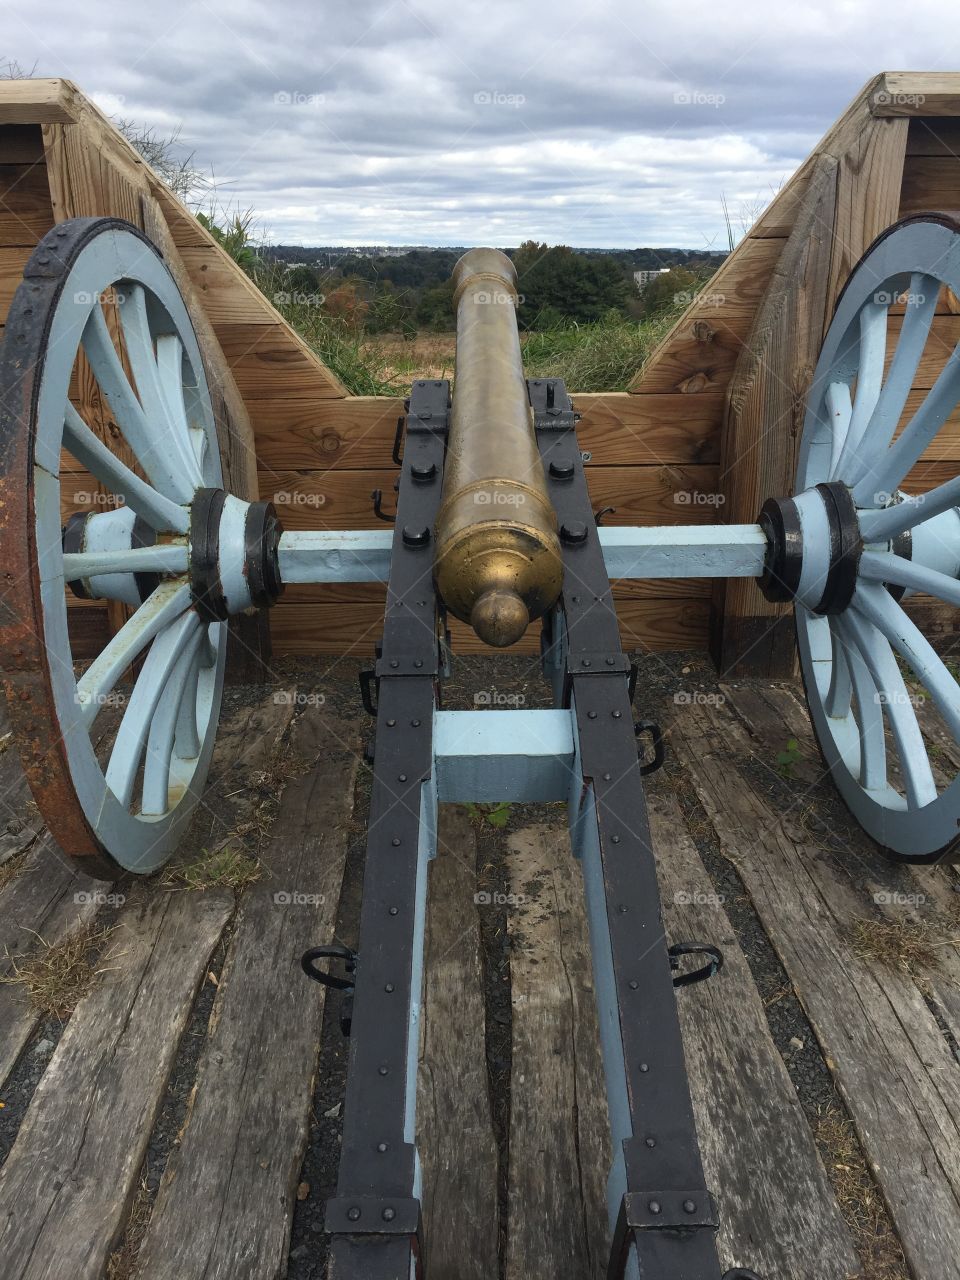 Cannon replica at valley forge historic park Pennsylvania 